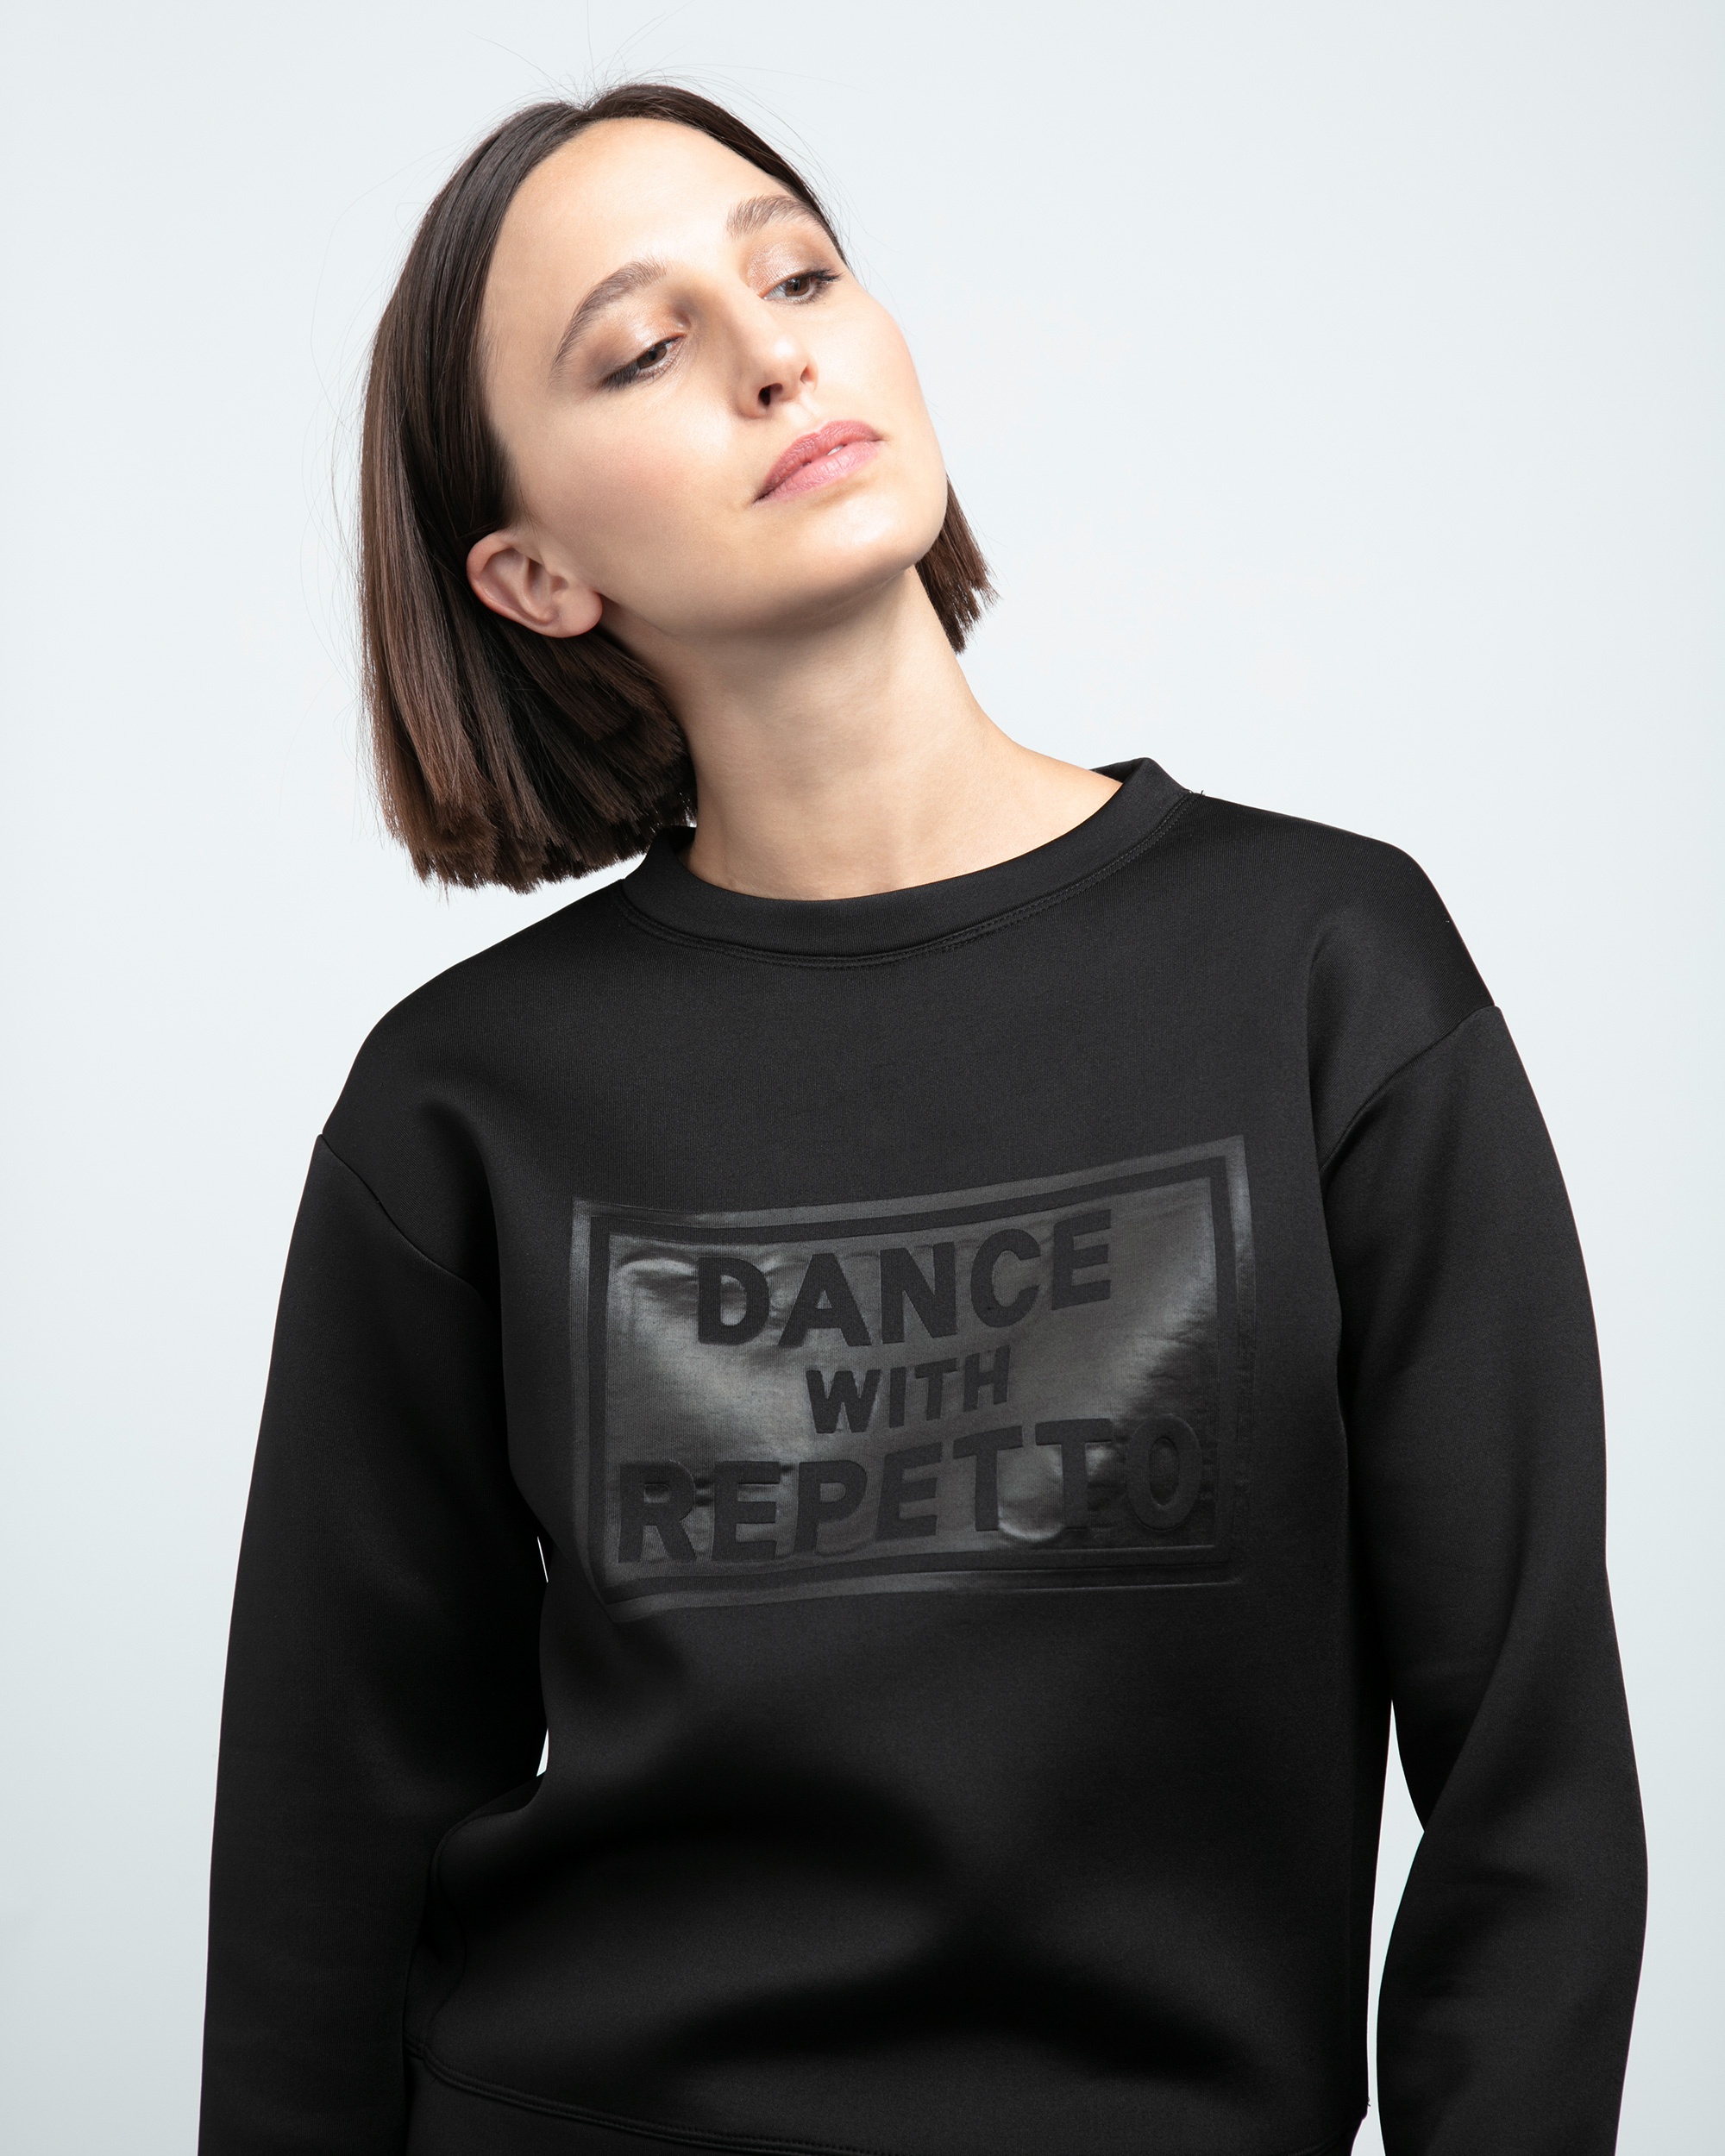 "Dance with Repetto" sweater - 2